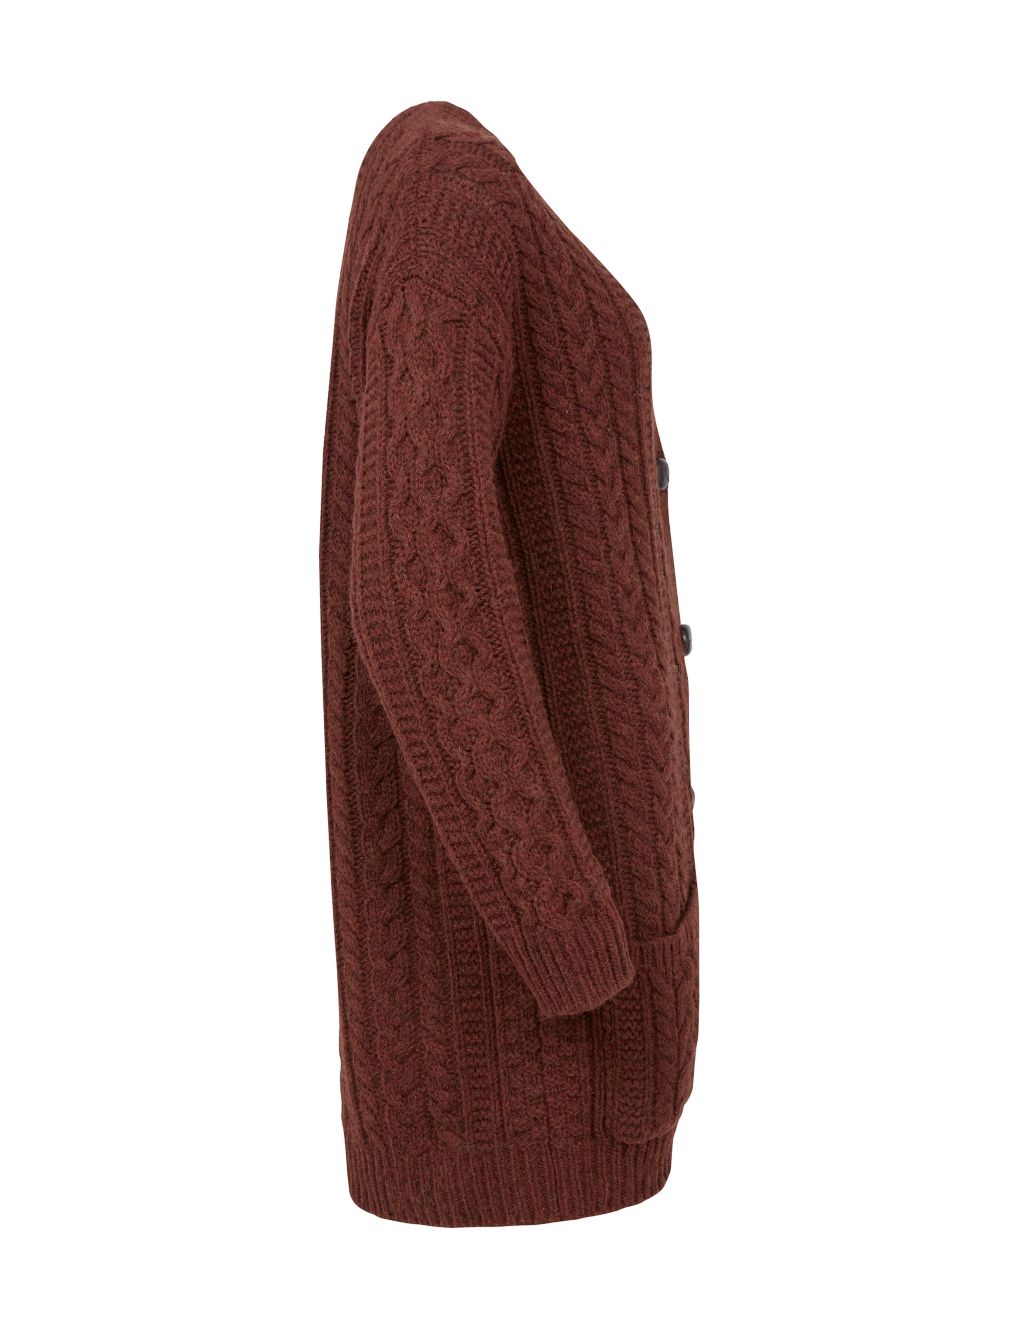 Pure Wool Cable Knit V-Neck Cardigan image 4